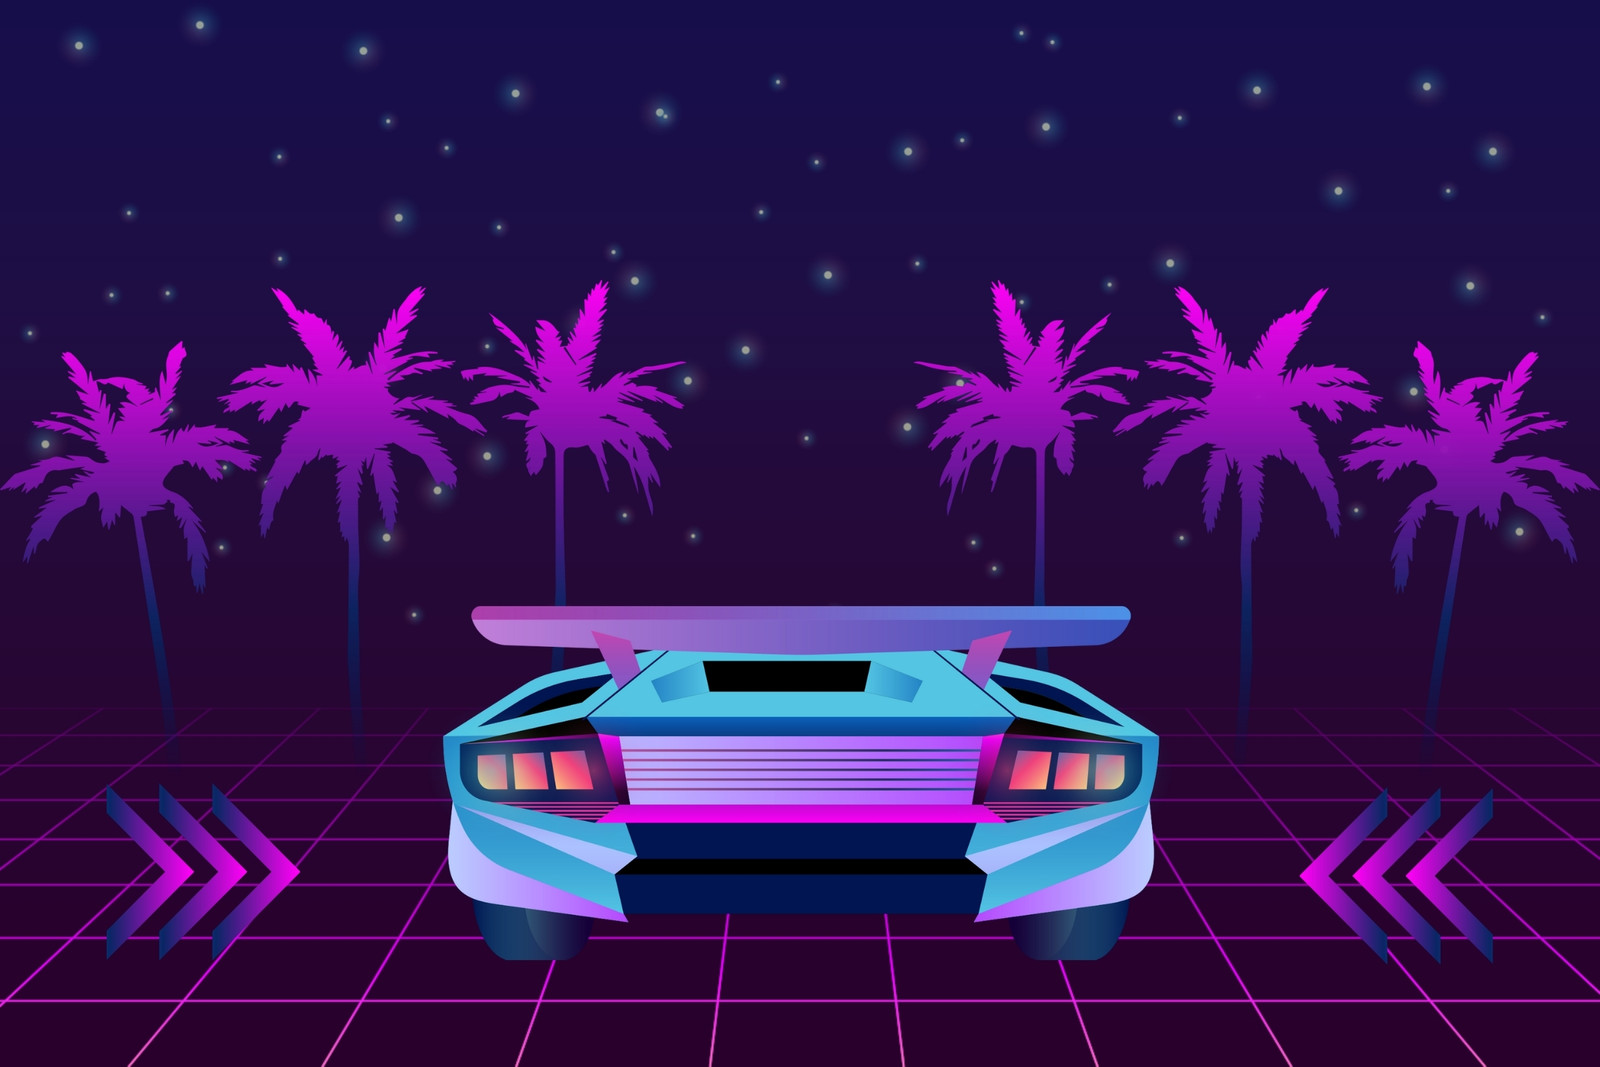 Free and customizable neon templates